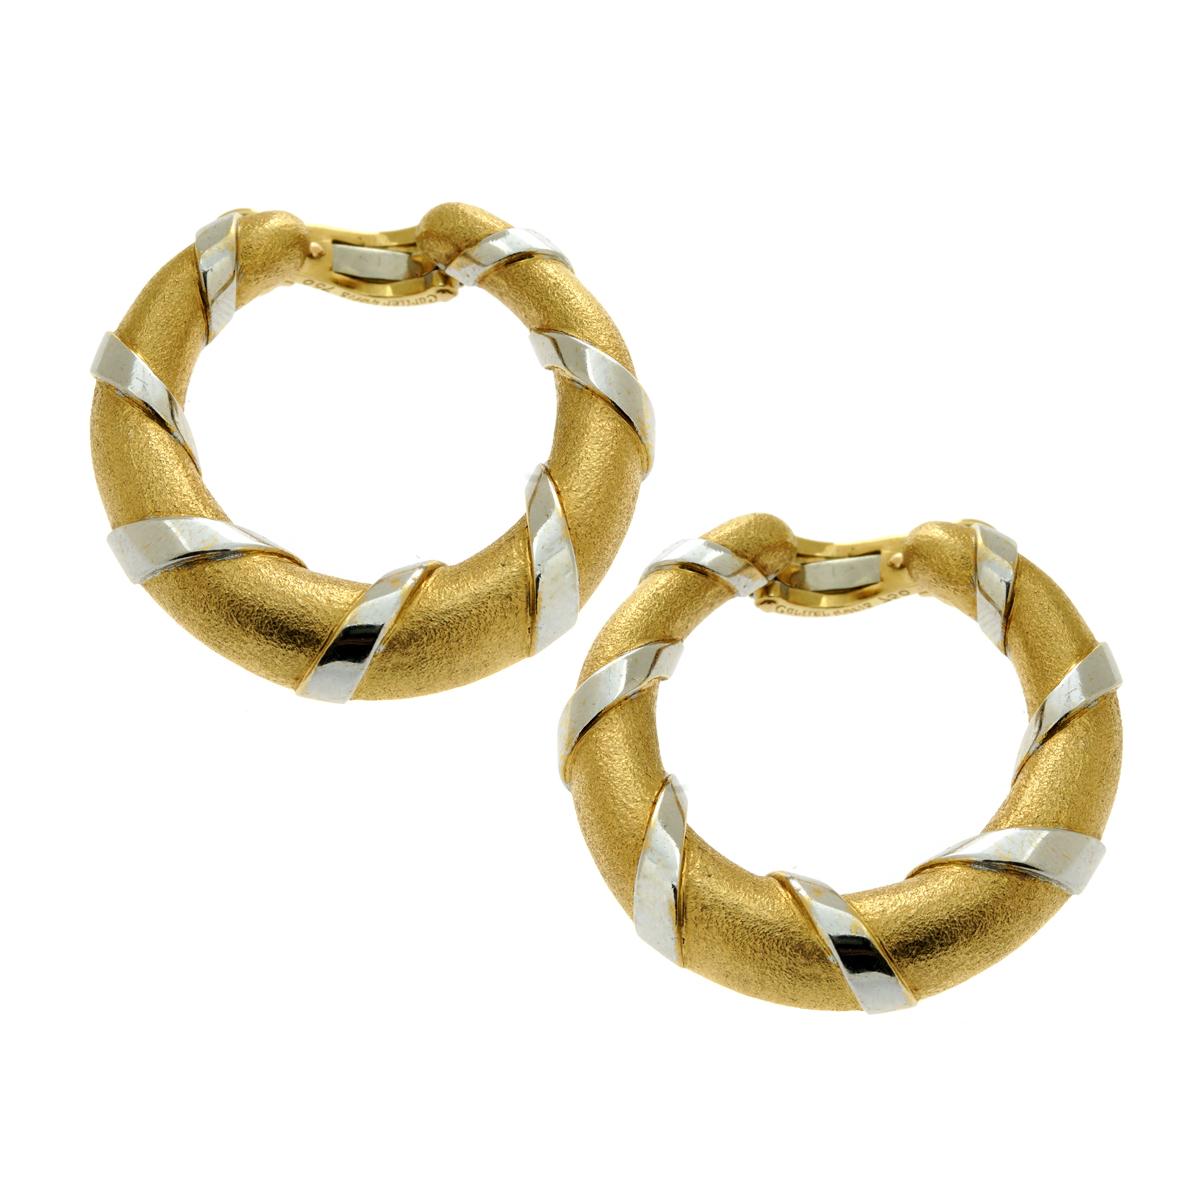 Cartier Paris Gold Hoop Two-Tone Earrings In Excellent Condition For Sale In Feasterville, PA